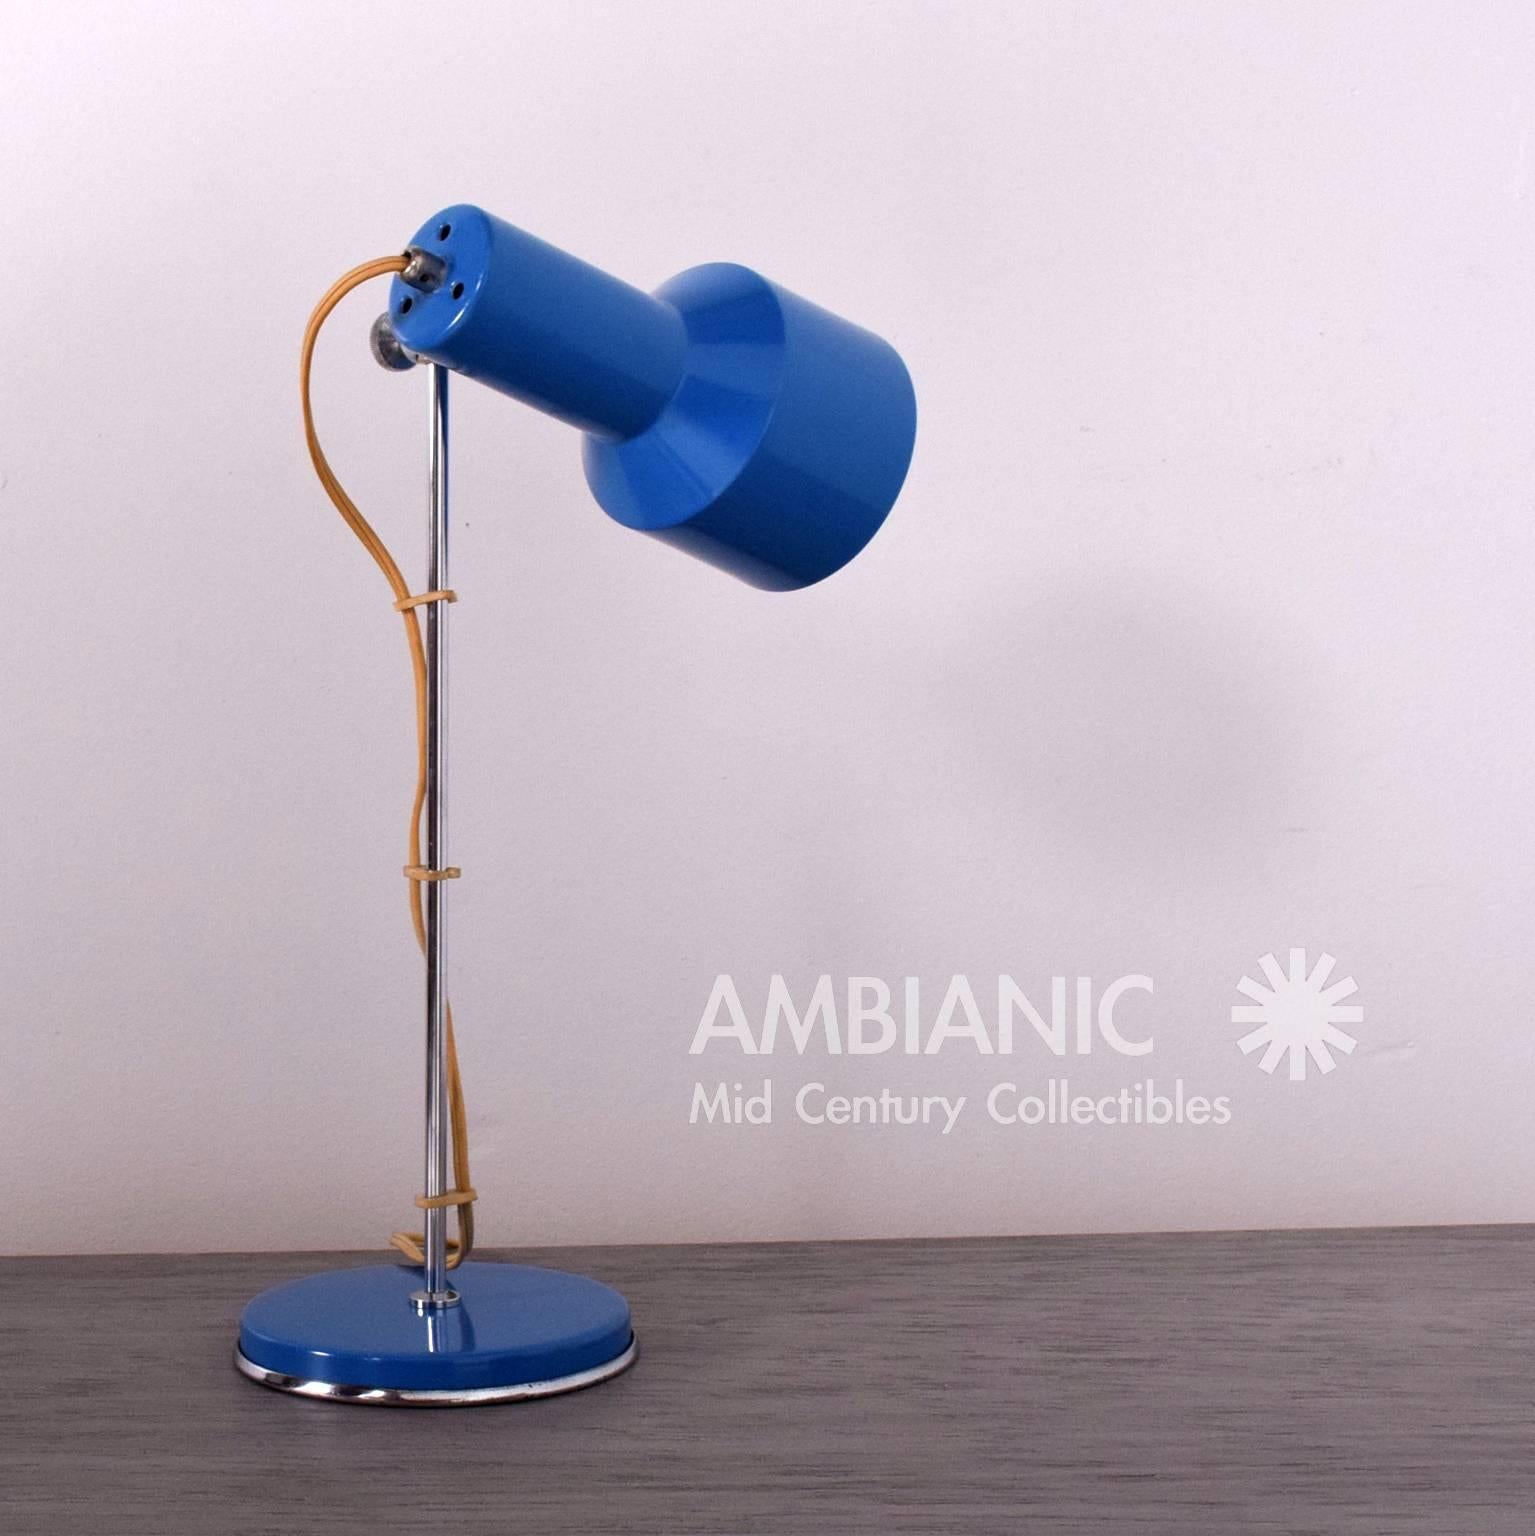 For your consideration a pair of Mid-Century Modern table lamps with adjustable shades. 

The shade can be positioned in almost any desired position. 
Lamps have the original chrome-plated finish. The lamps have been restored in medium blue